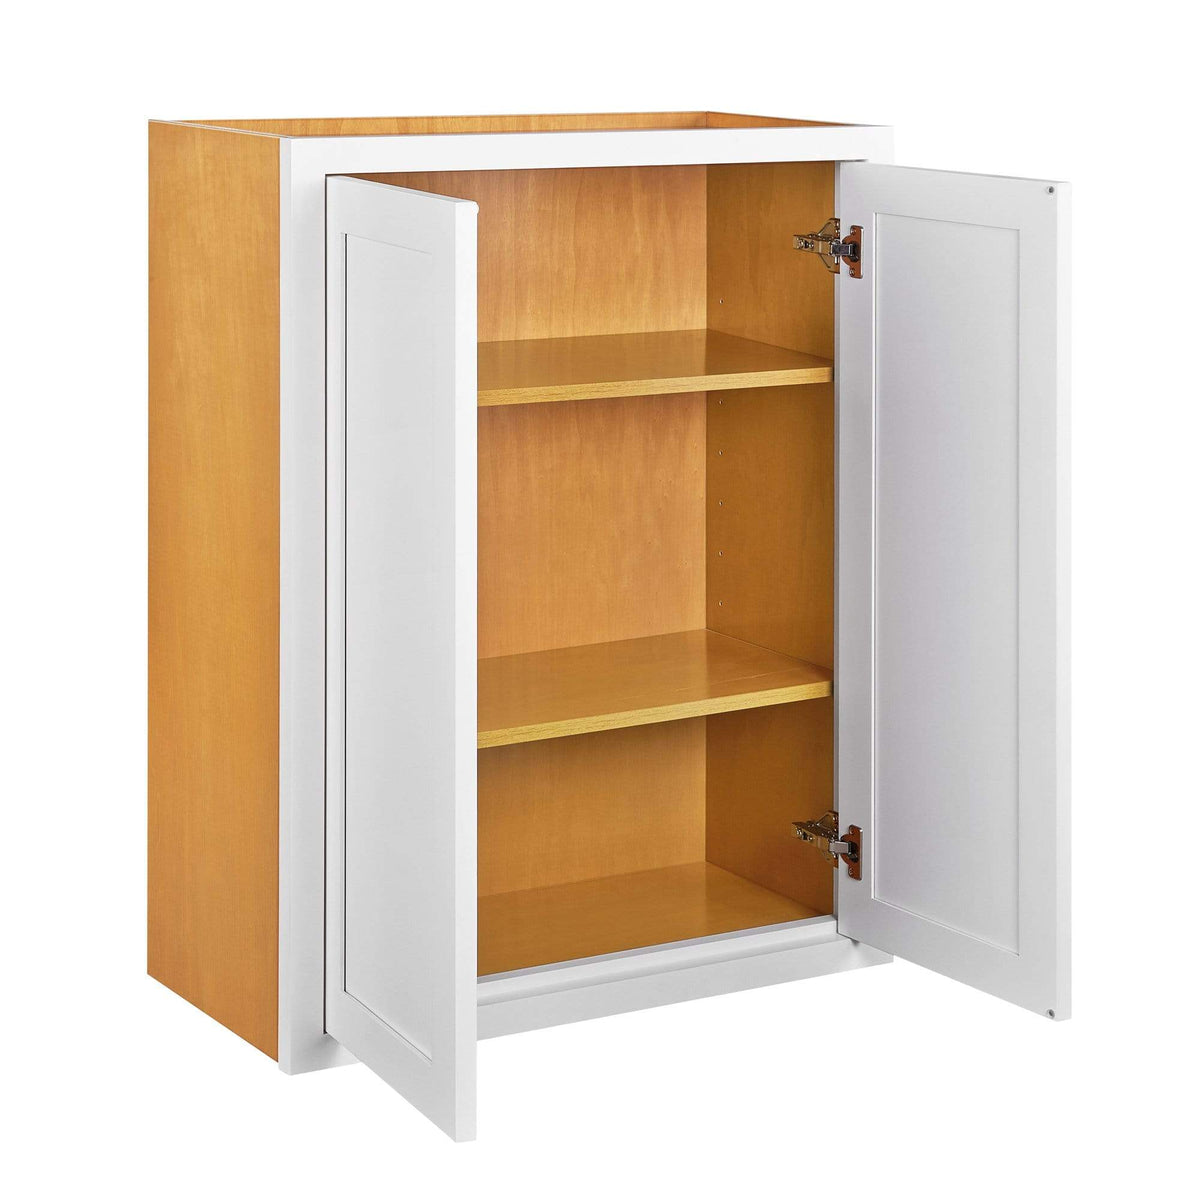 30 Tall Snow White Inset Shaker Wall Cabinet Double Door 24 27 30 33 36 Rta Wholesalers